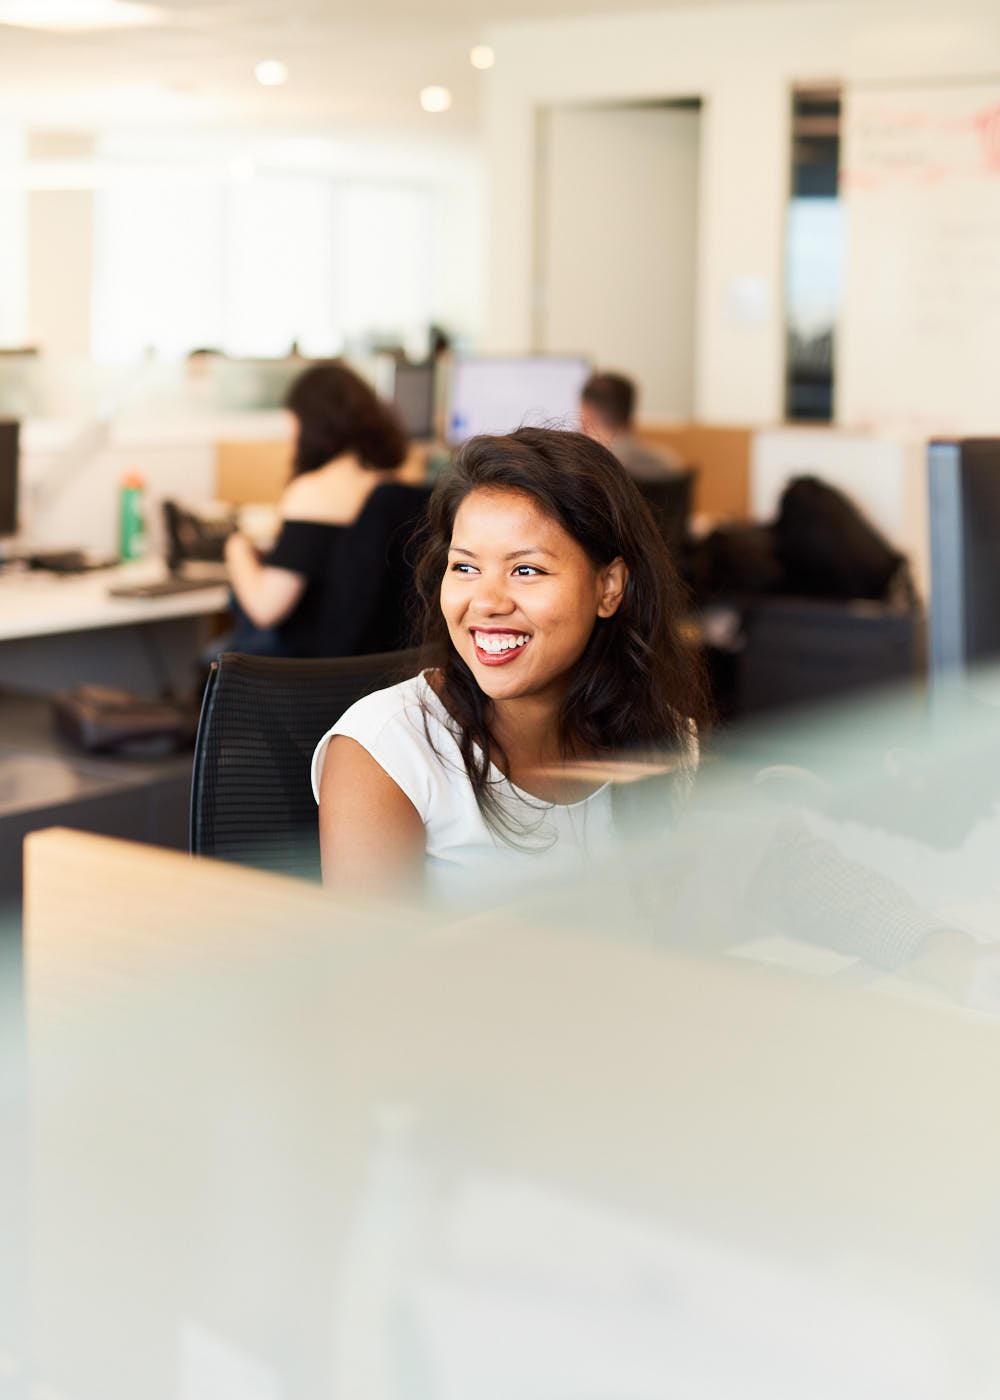 Candid corporate photograph of smiling Toronto business woman in office